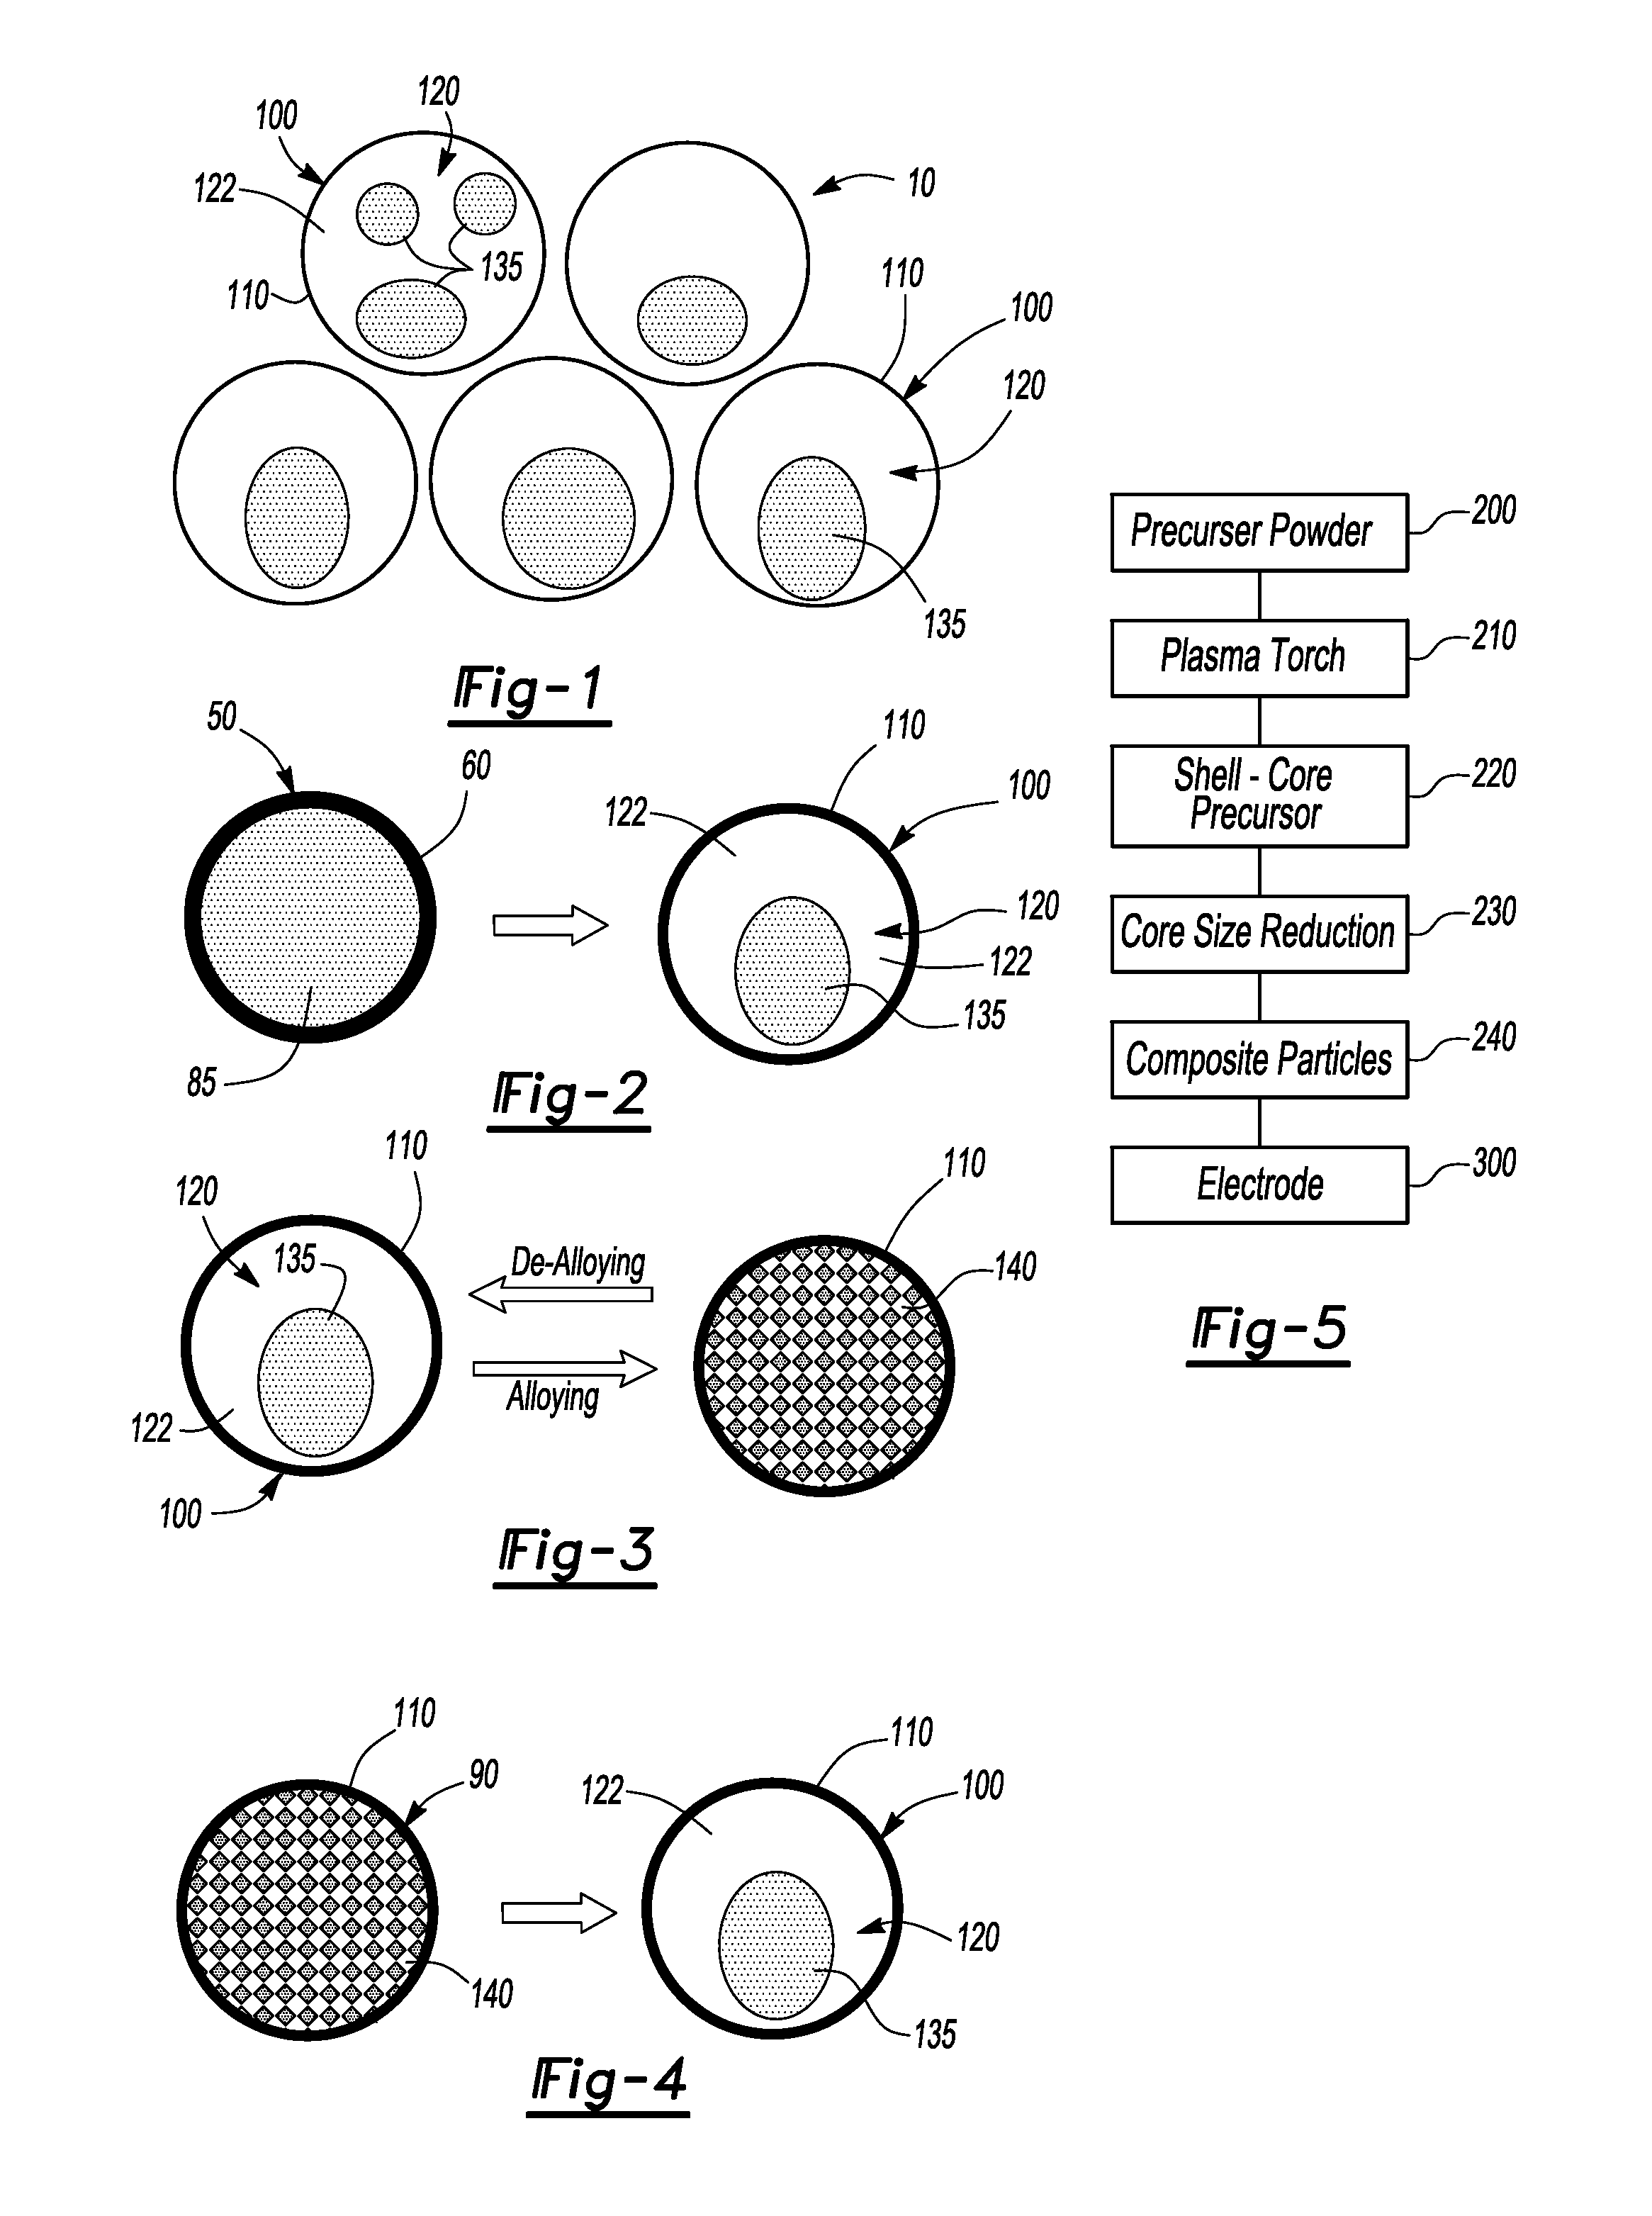 Material With Core-Shell Structure